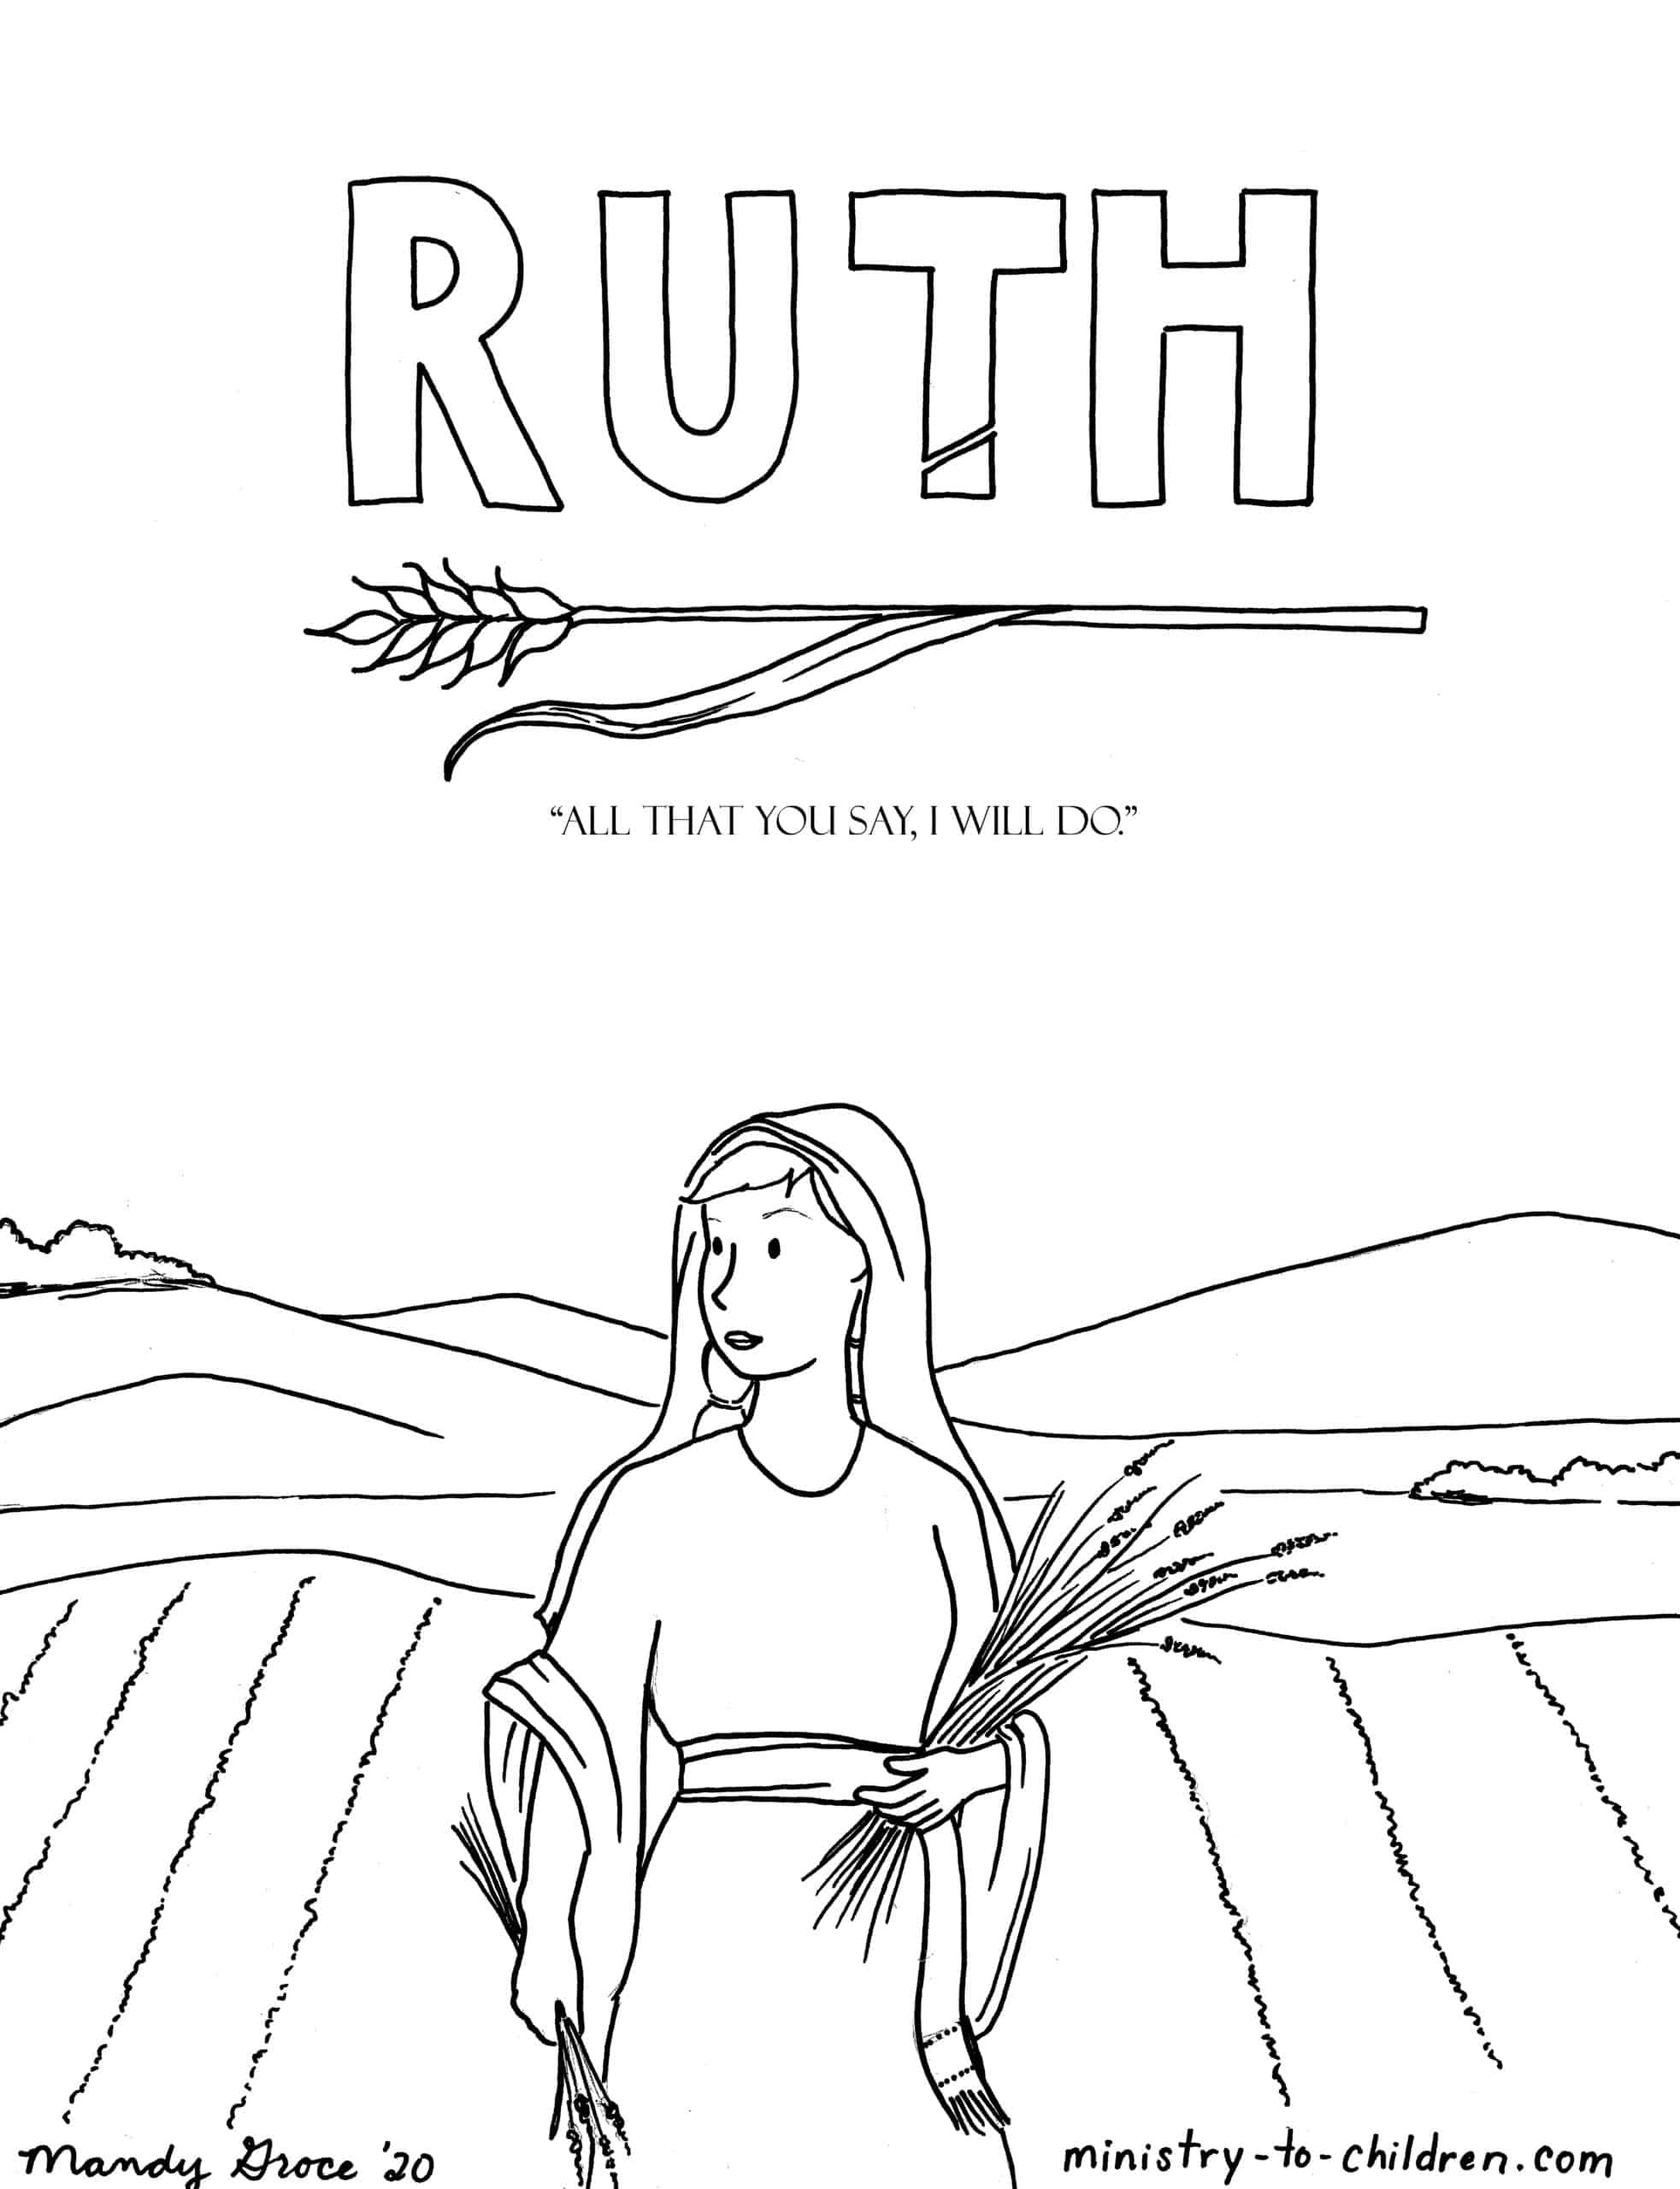 the-story-of-ruth-ruth-bible-craft-preschool-bible-lessons-bible